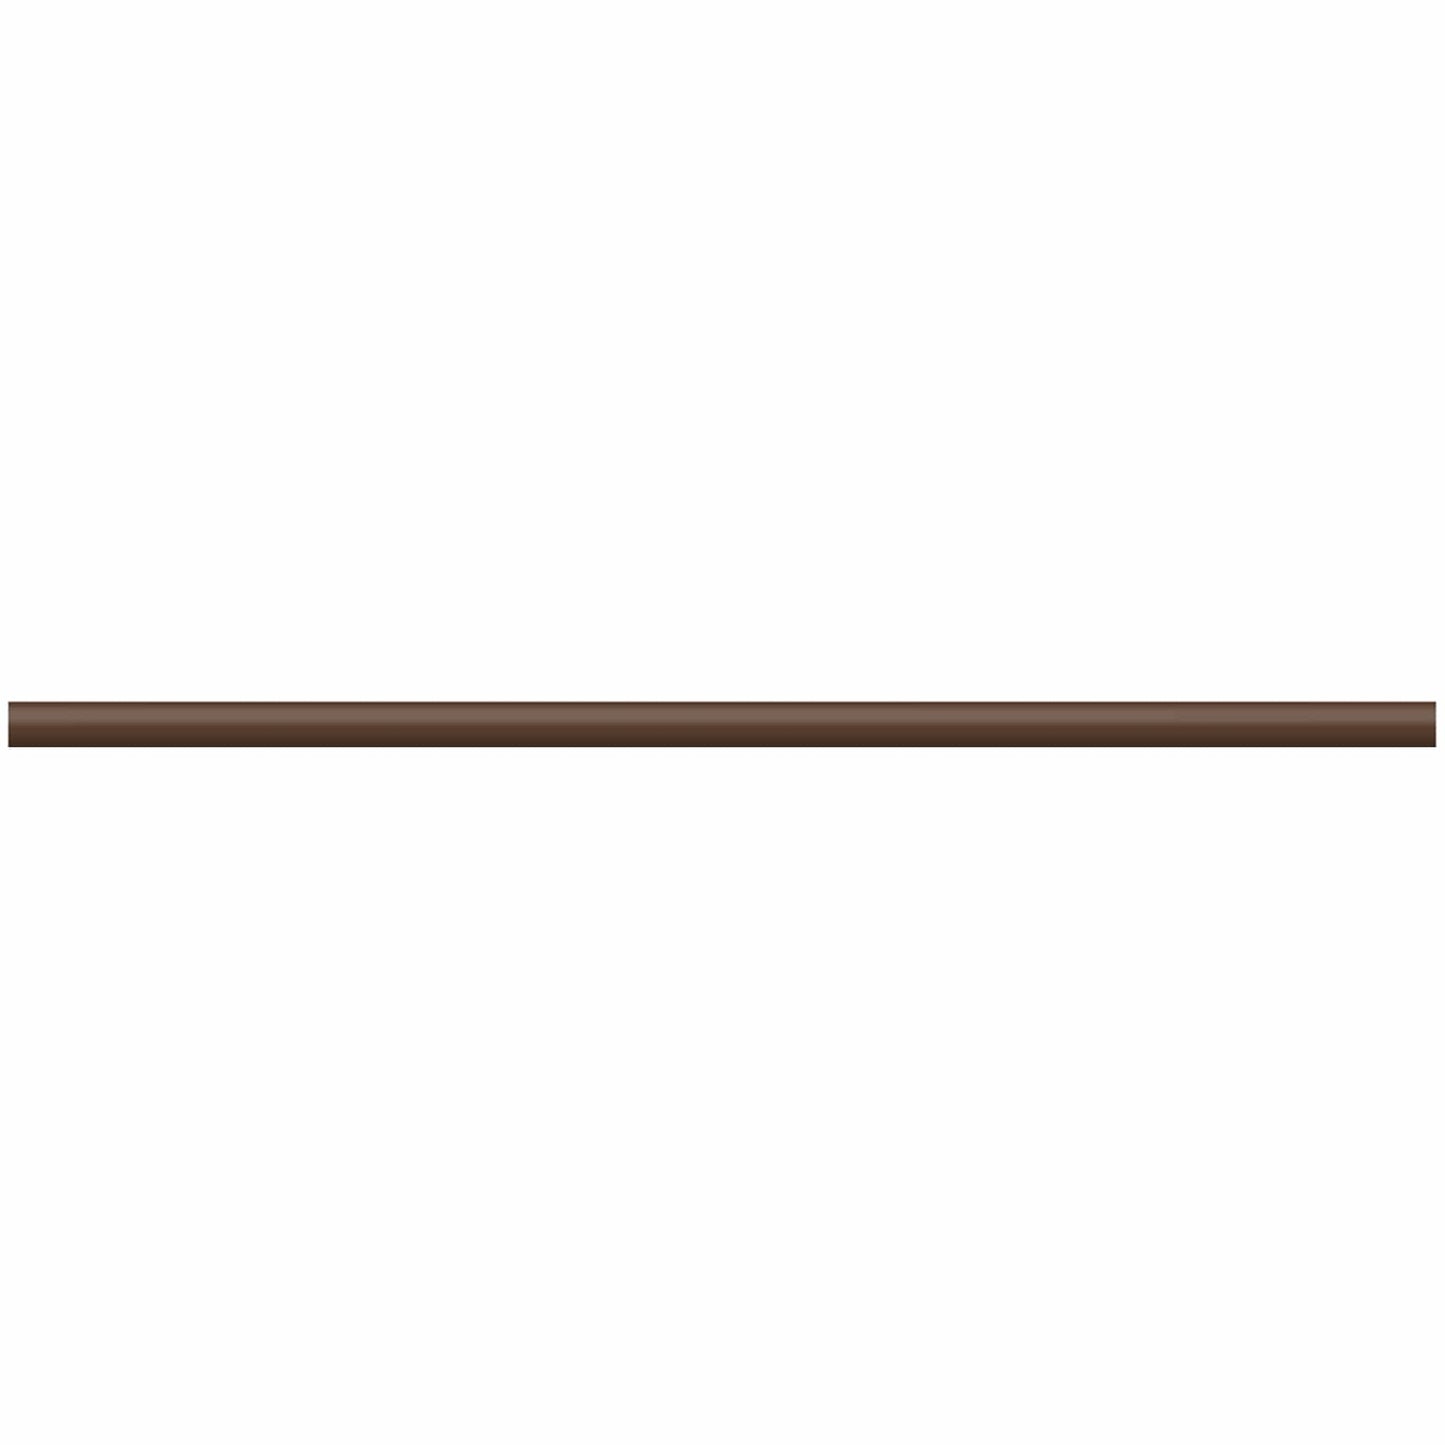 Copper Pony Poles Solid Light Brown Pole - 10' ft Zero Maintenance (Polymer Wrapped Wood)